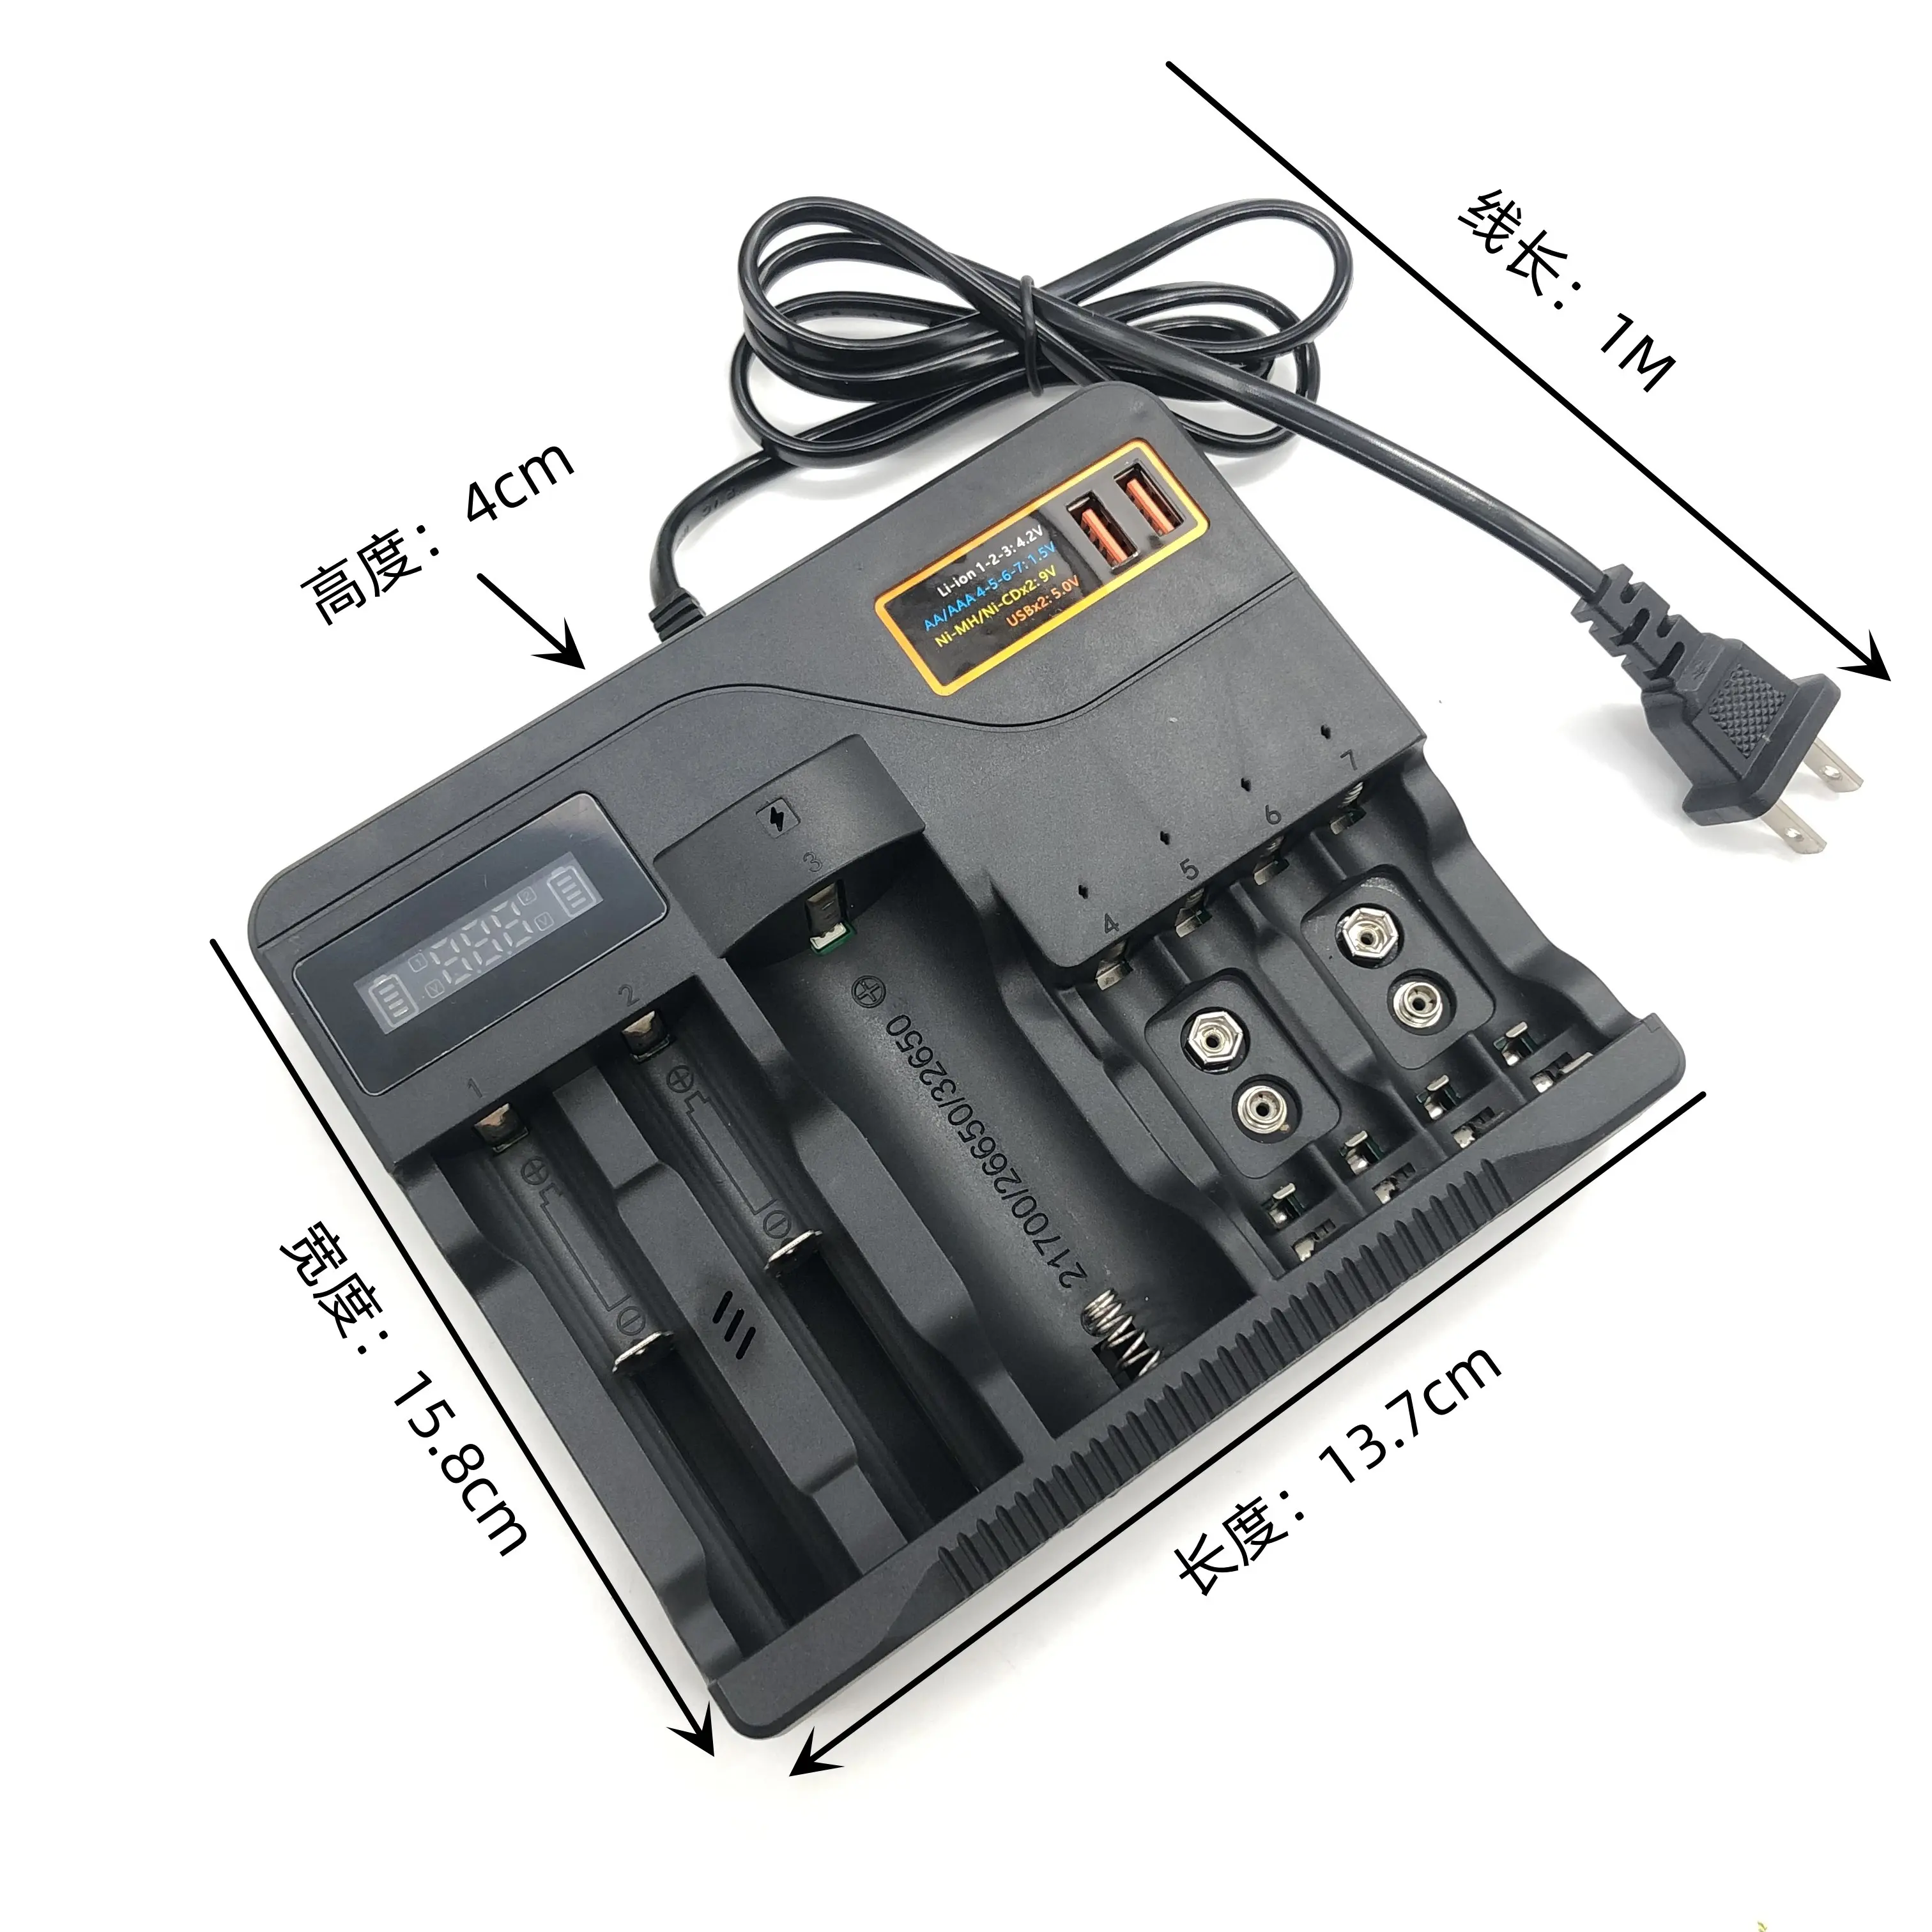 2022 CH-88918650 Lithium Battery charger Intelligent multi-slot 3.7V 4.2V lithium battery charger AA,AAA charger